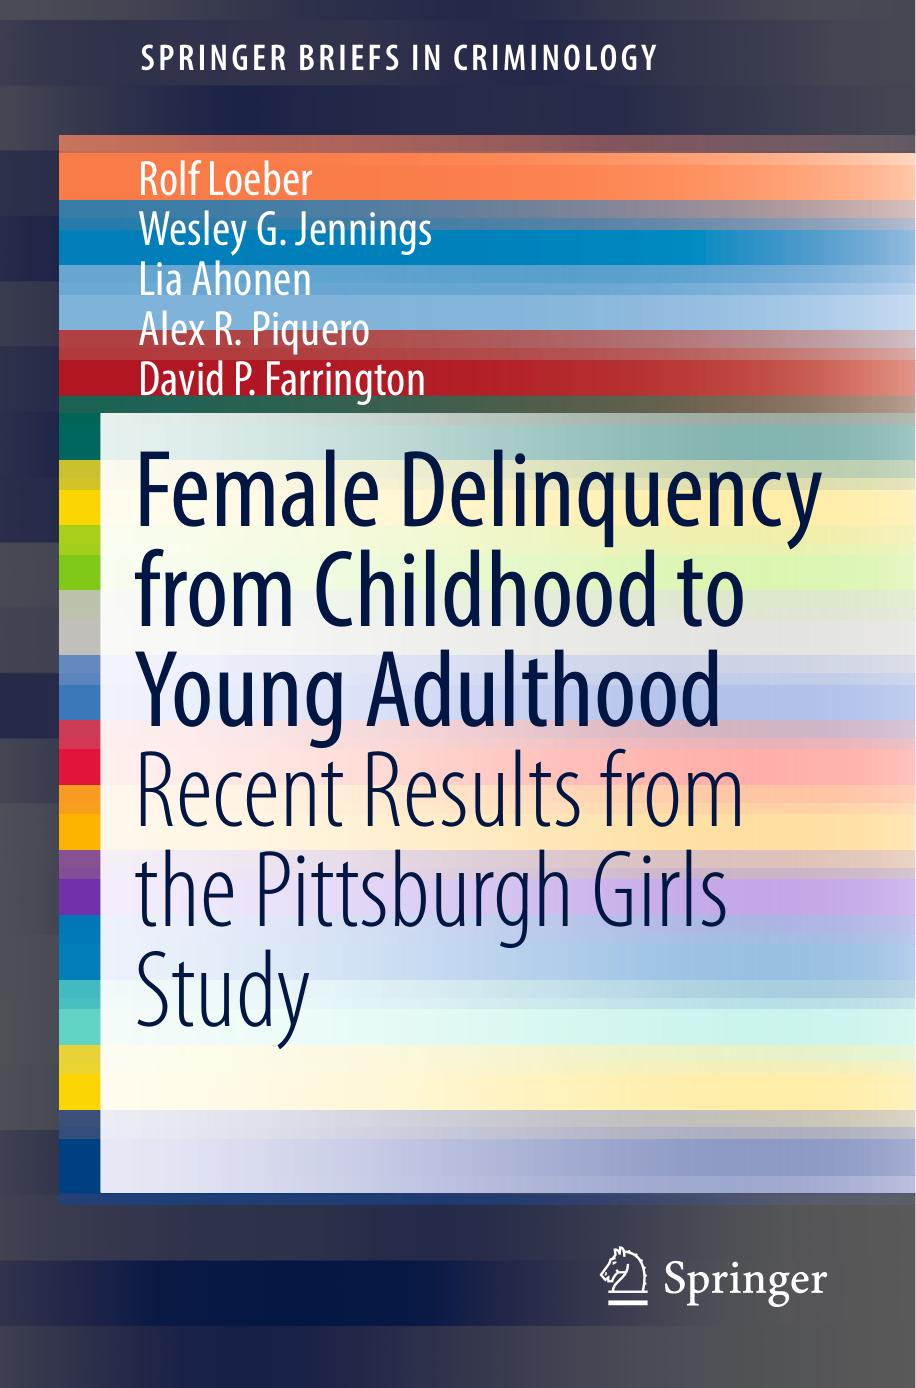 Female Delinquency From Childhood To Young Adulthood  Recent Results from the Pittsburgh Girls Study 2017